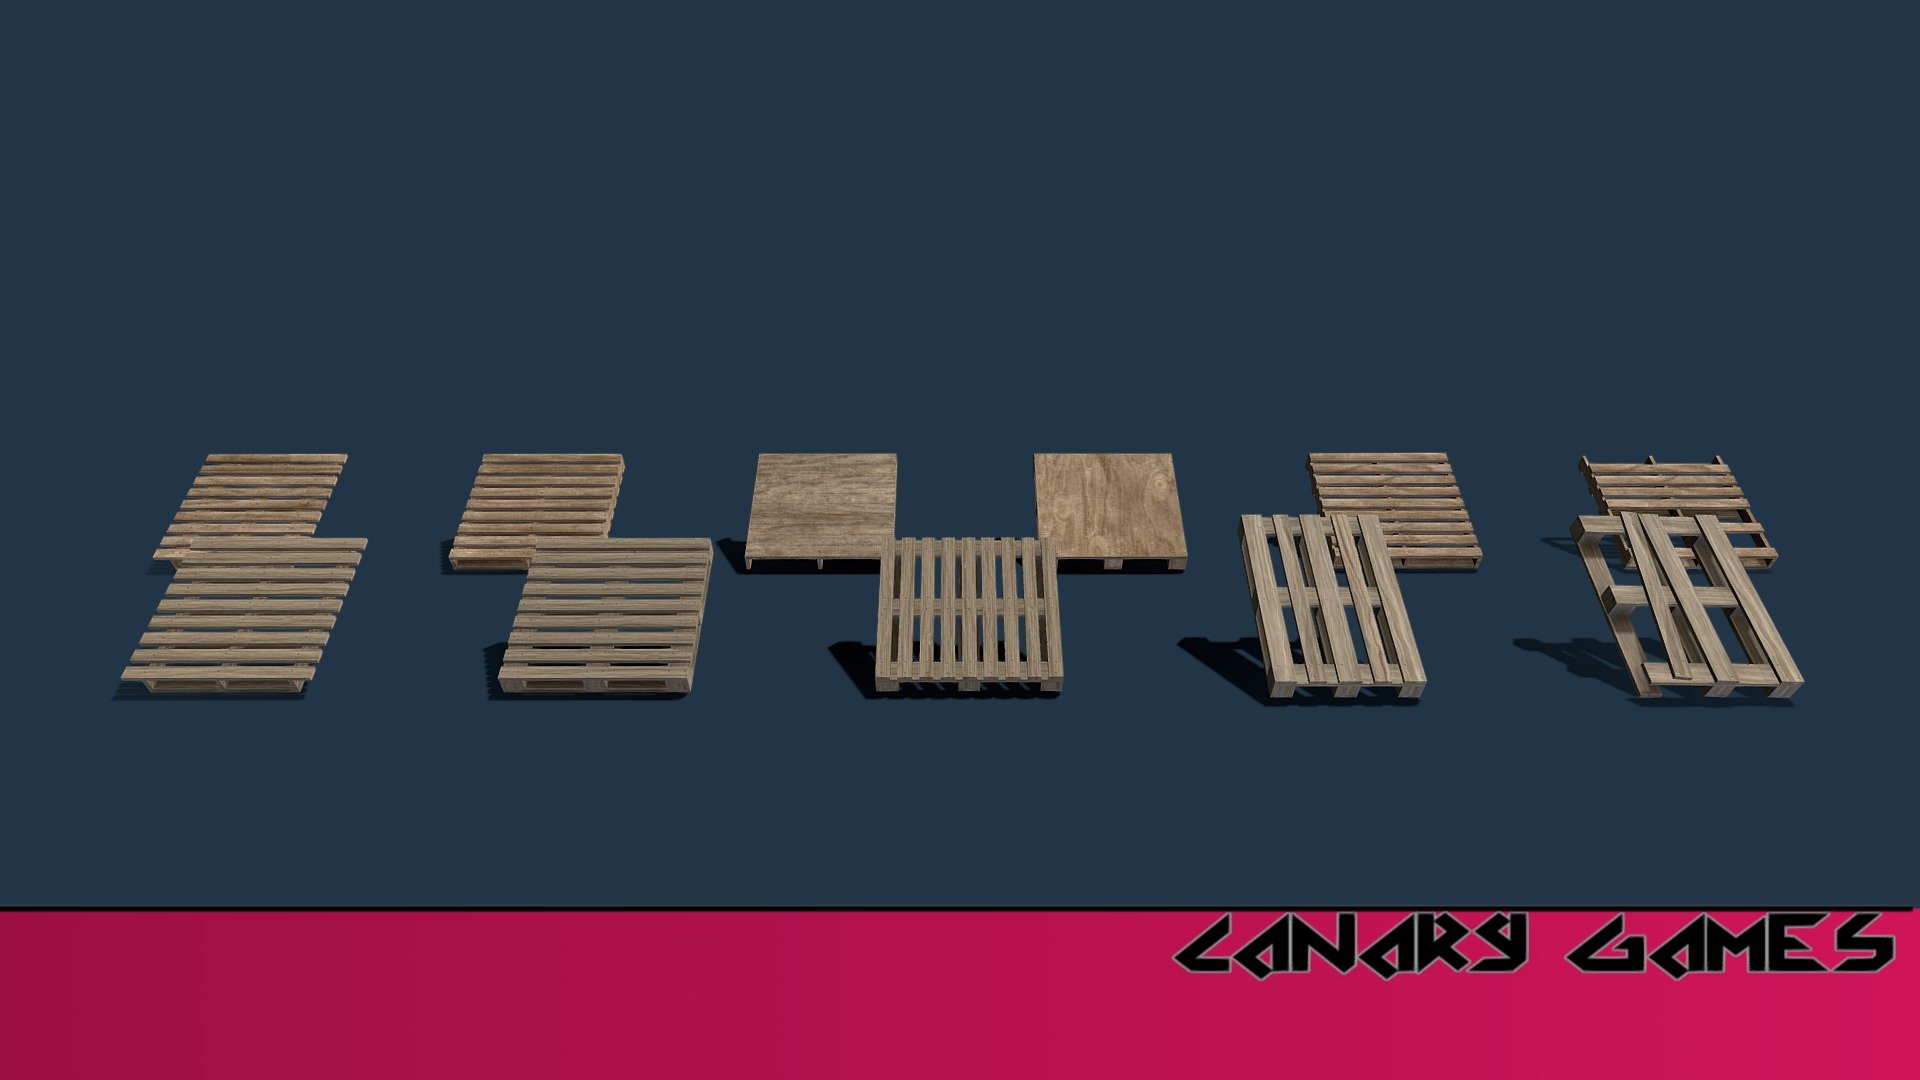 Pallets Set
With so much pallet, they are making me want to build!



Contents of this package:




1x Text file Readme

1x Wings3D save file (all models)

1x File with all models (Format .OBJ)

1x Folder with all models (11 Models)

14x Textures for two materials

2x .PSD image archive to edit (Gimp or Photoshop)



Pallets Set &ldquo;Anim